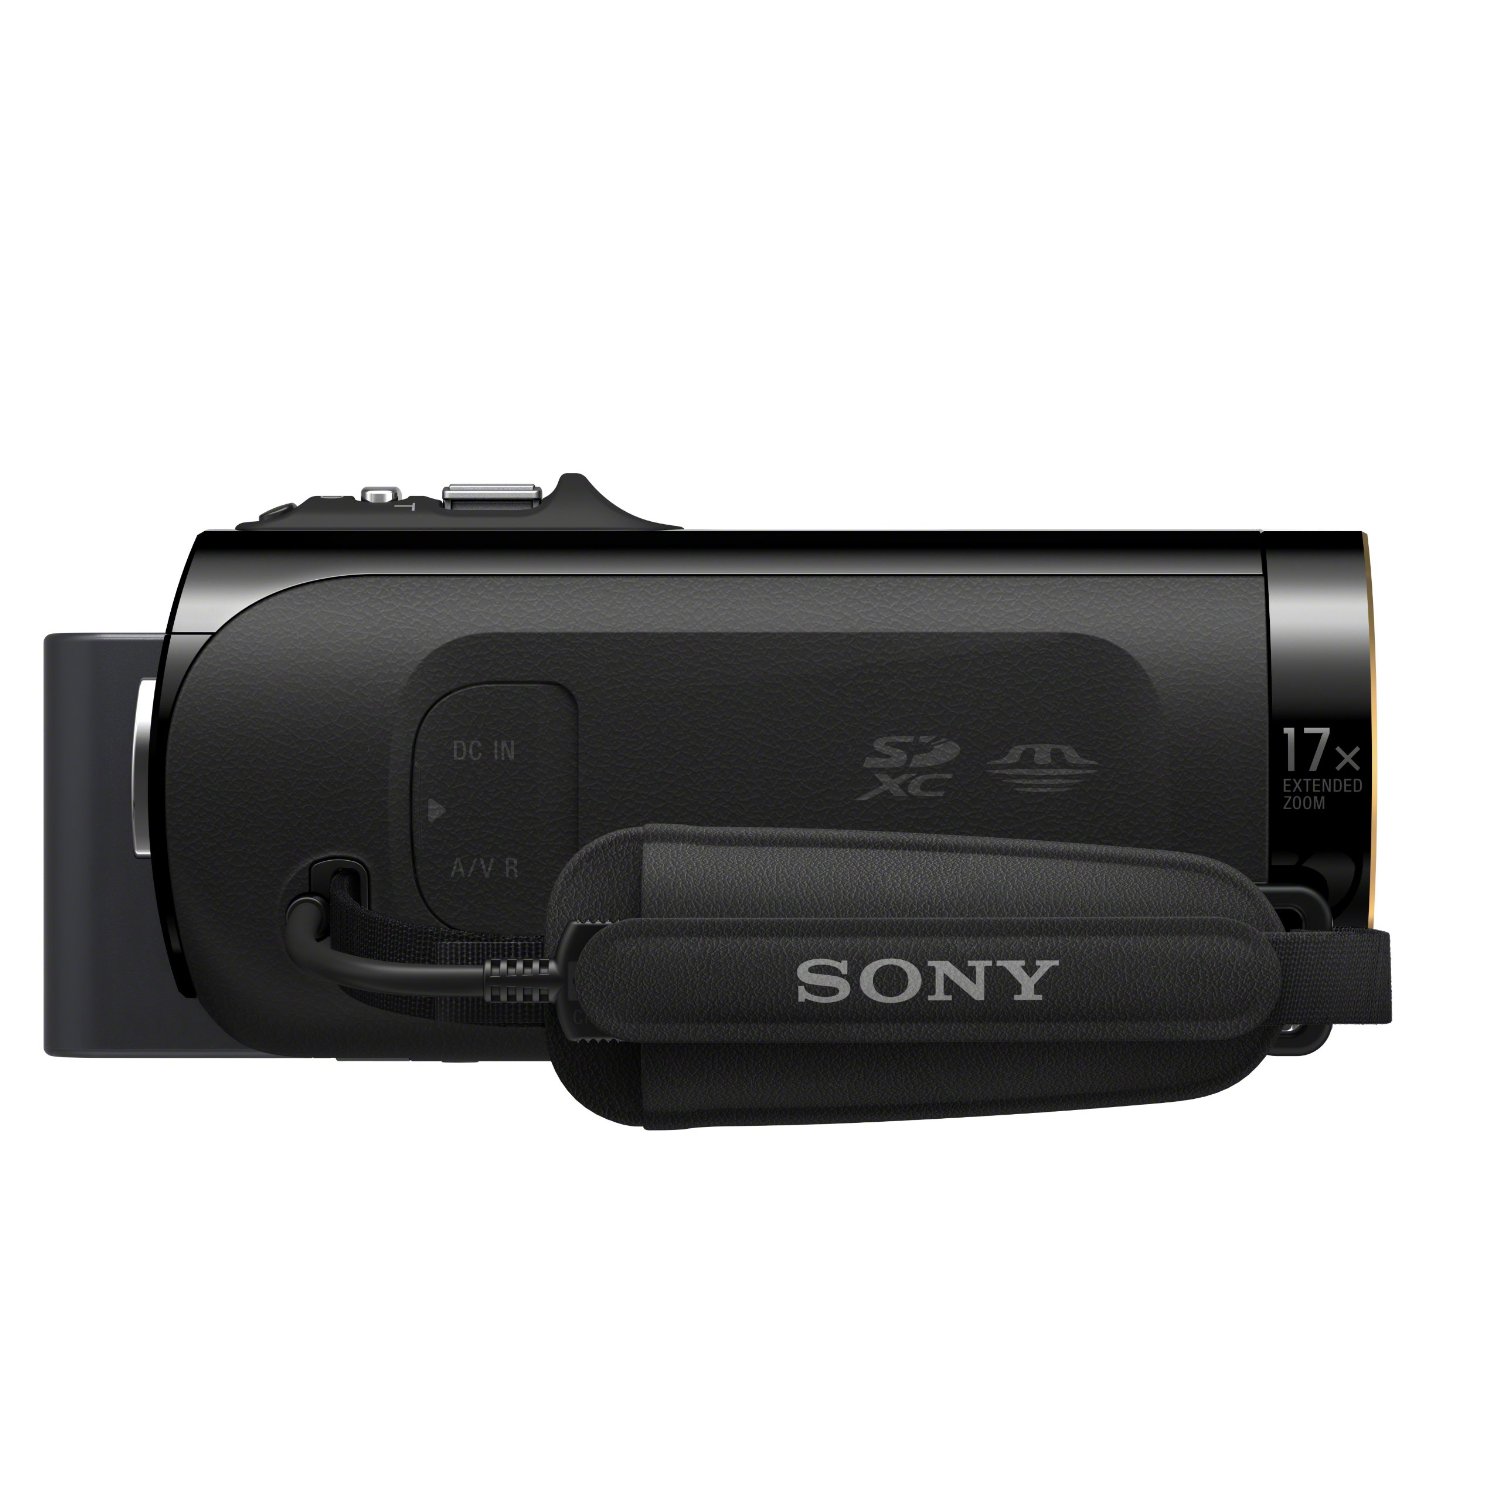 http://thetechjournal.com/wp-content/uploads/images/1203/1333213211-sony-hdrtd20v-hd-handycam-204-mp-3d-camcorder-9.jpg